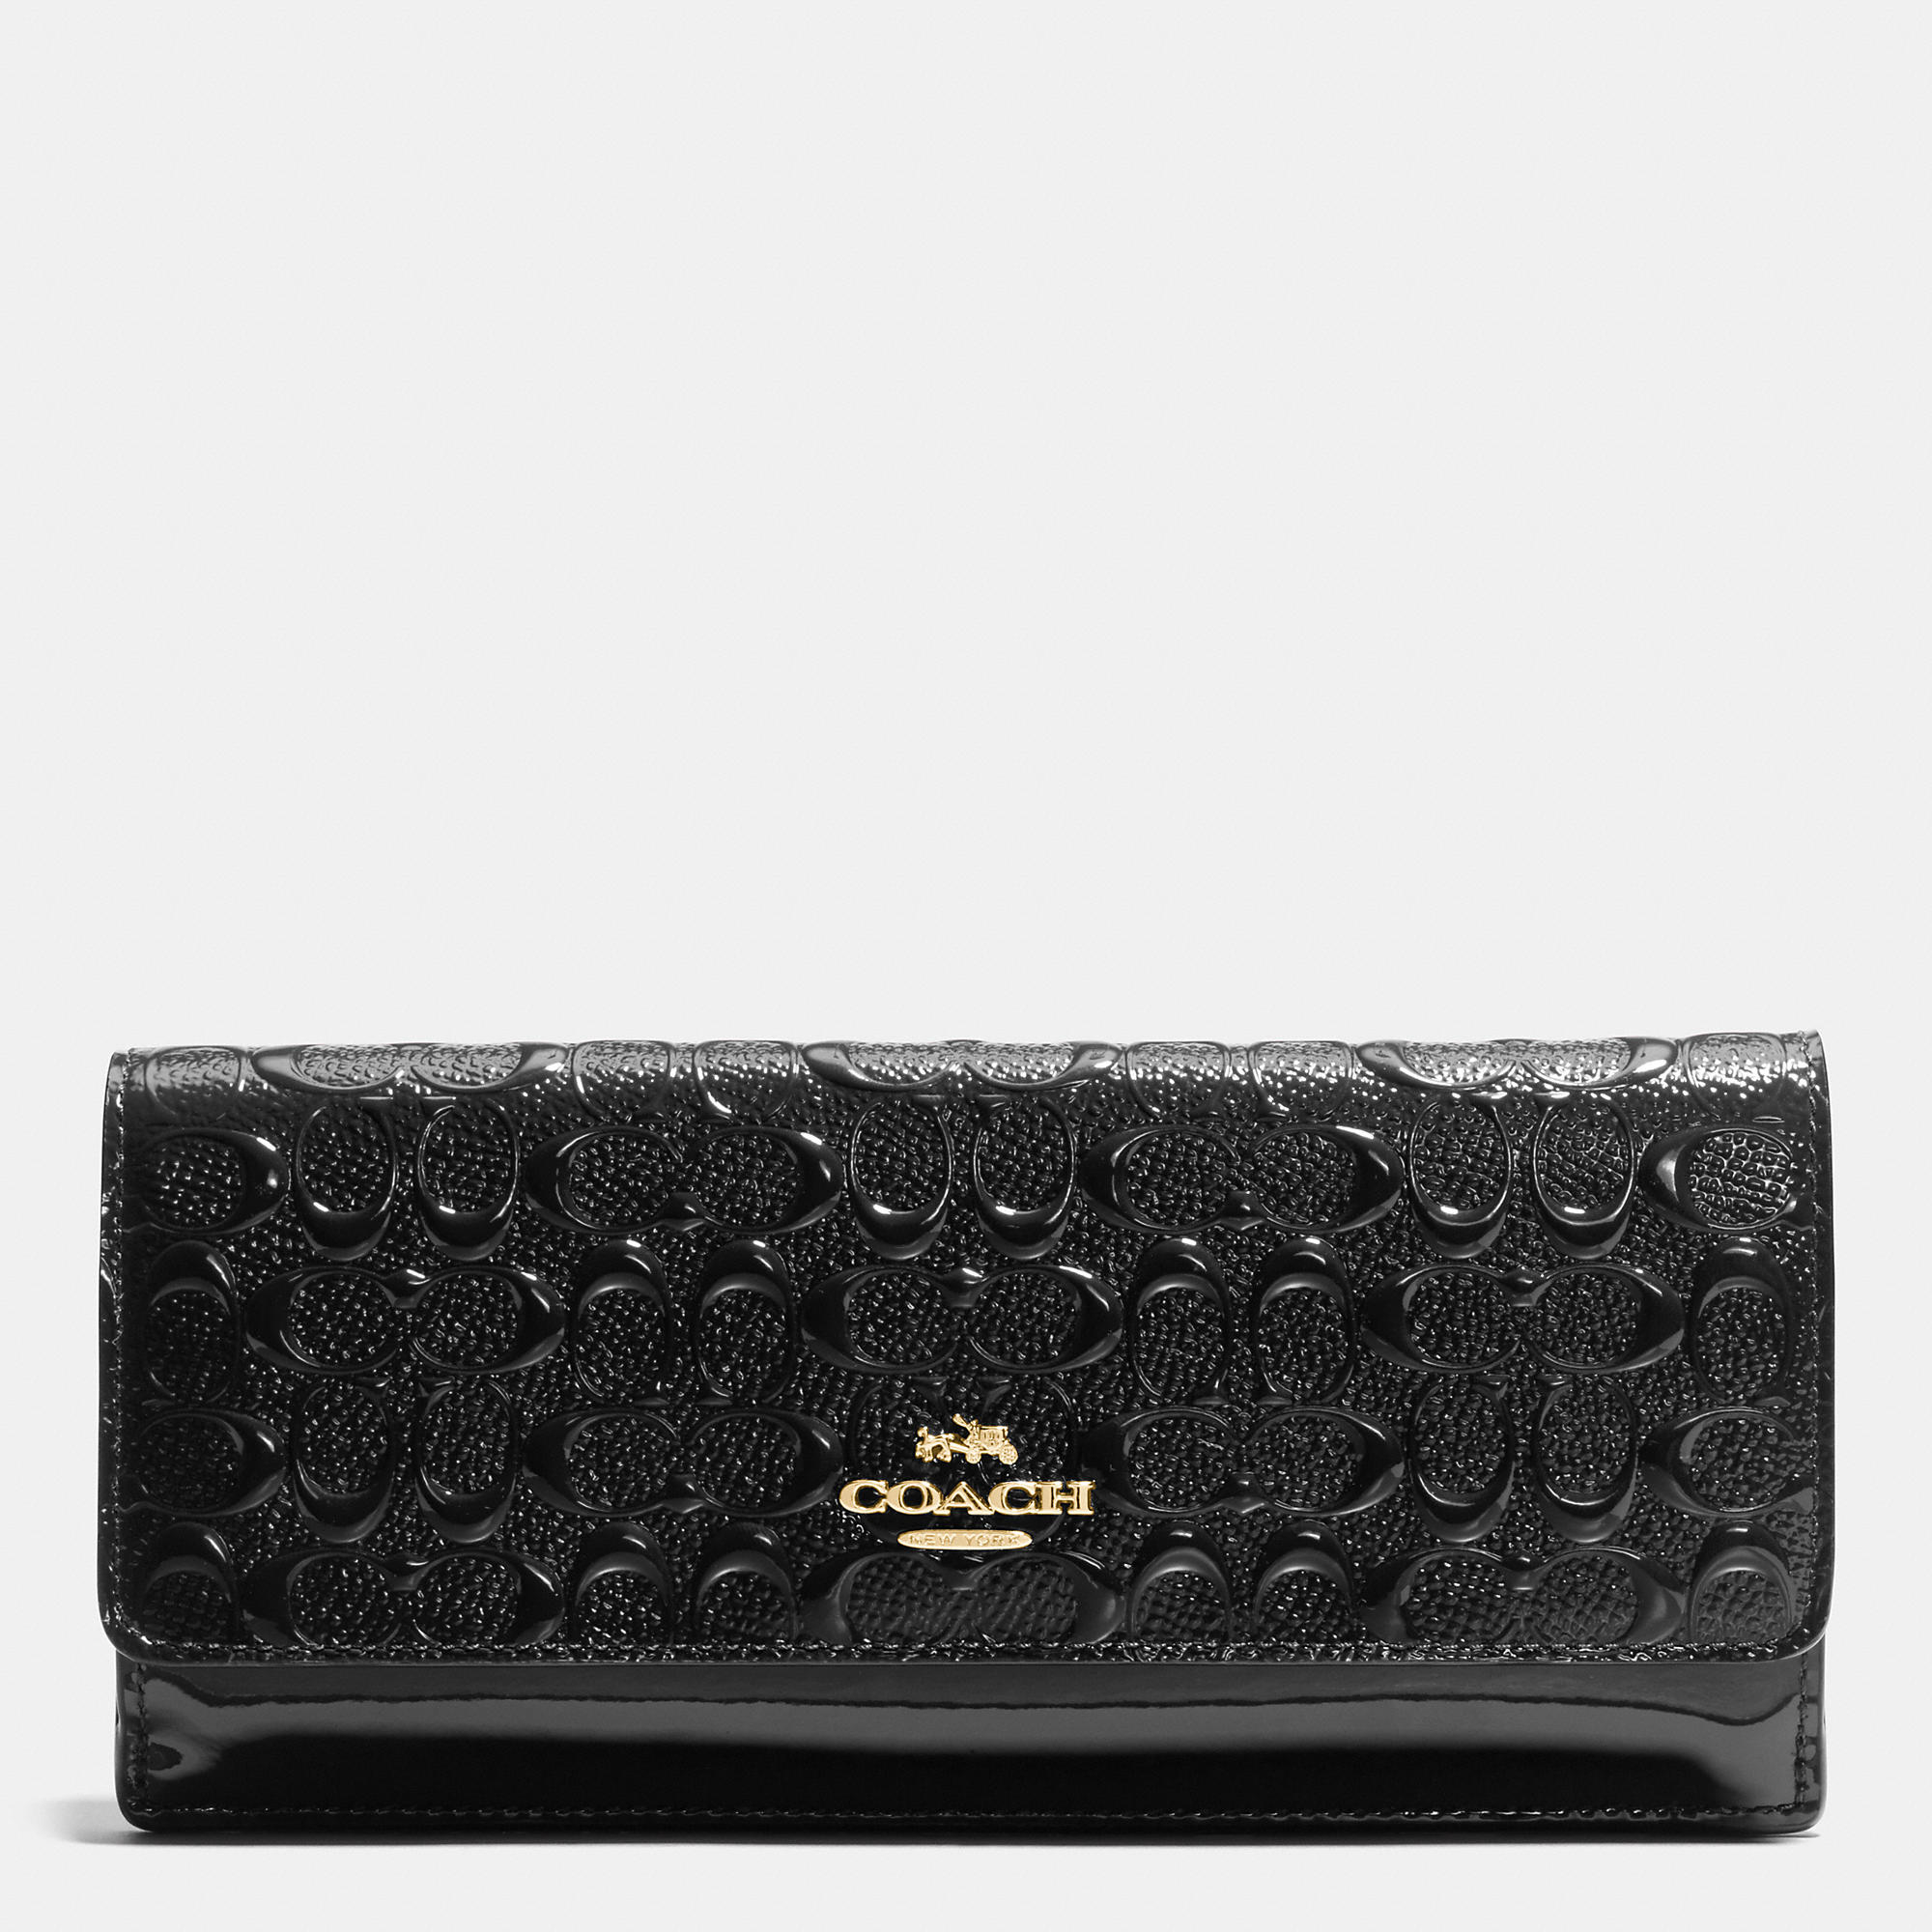 COACH Soft Wallet In Logo Embossed Patent Leather in Light Gold/Black (Black) - Lyst